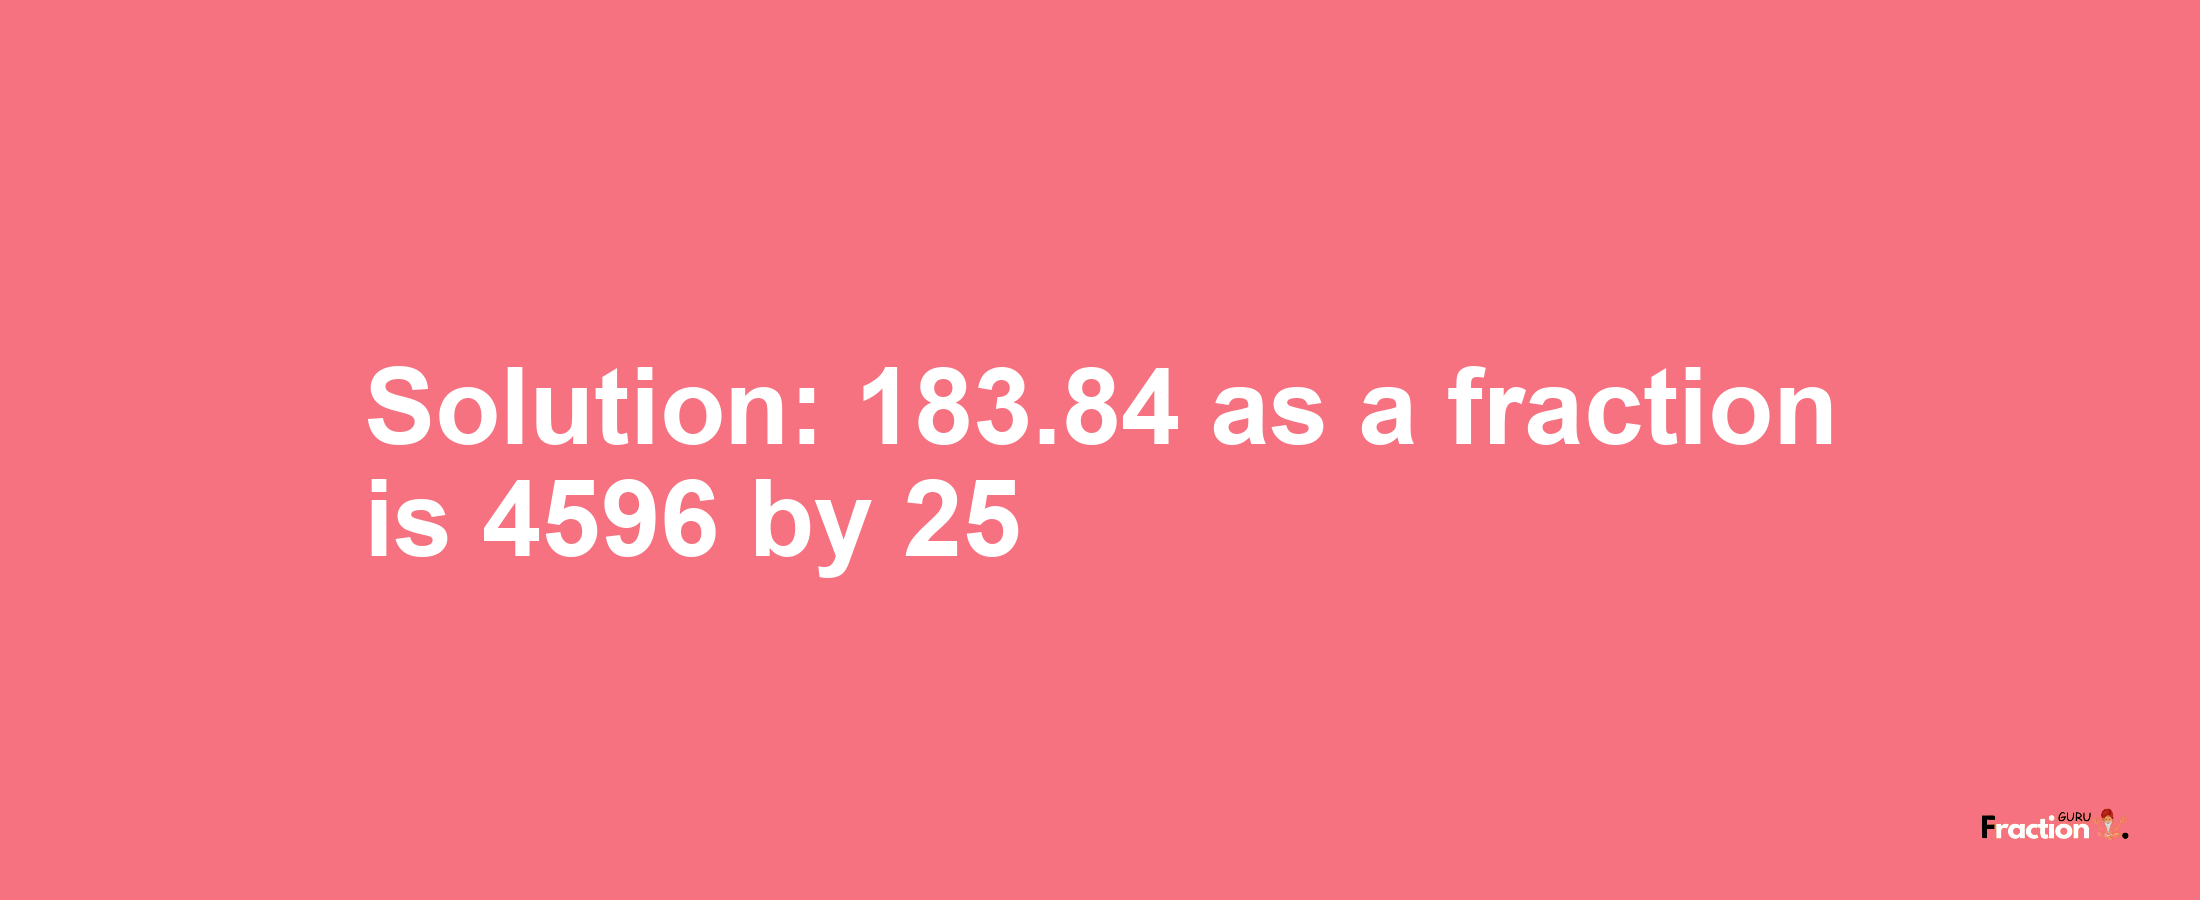 Solution:183.84 as a fraction is 4596/25